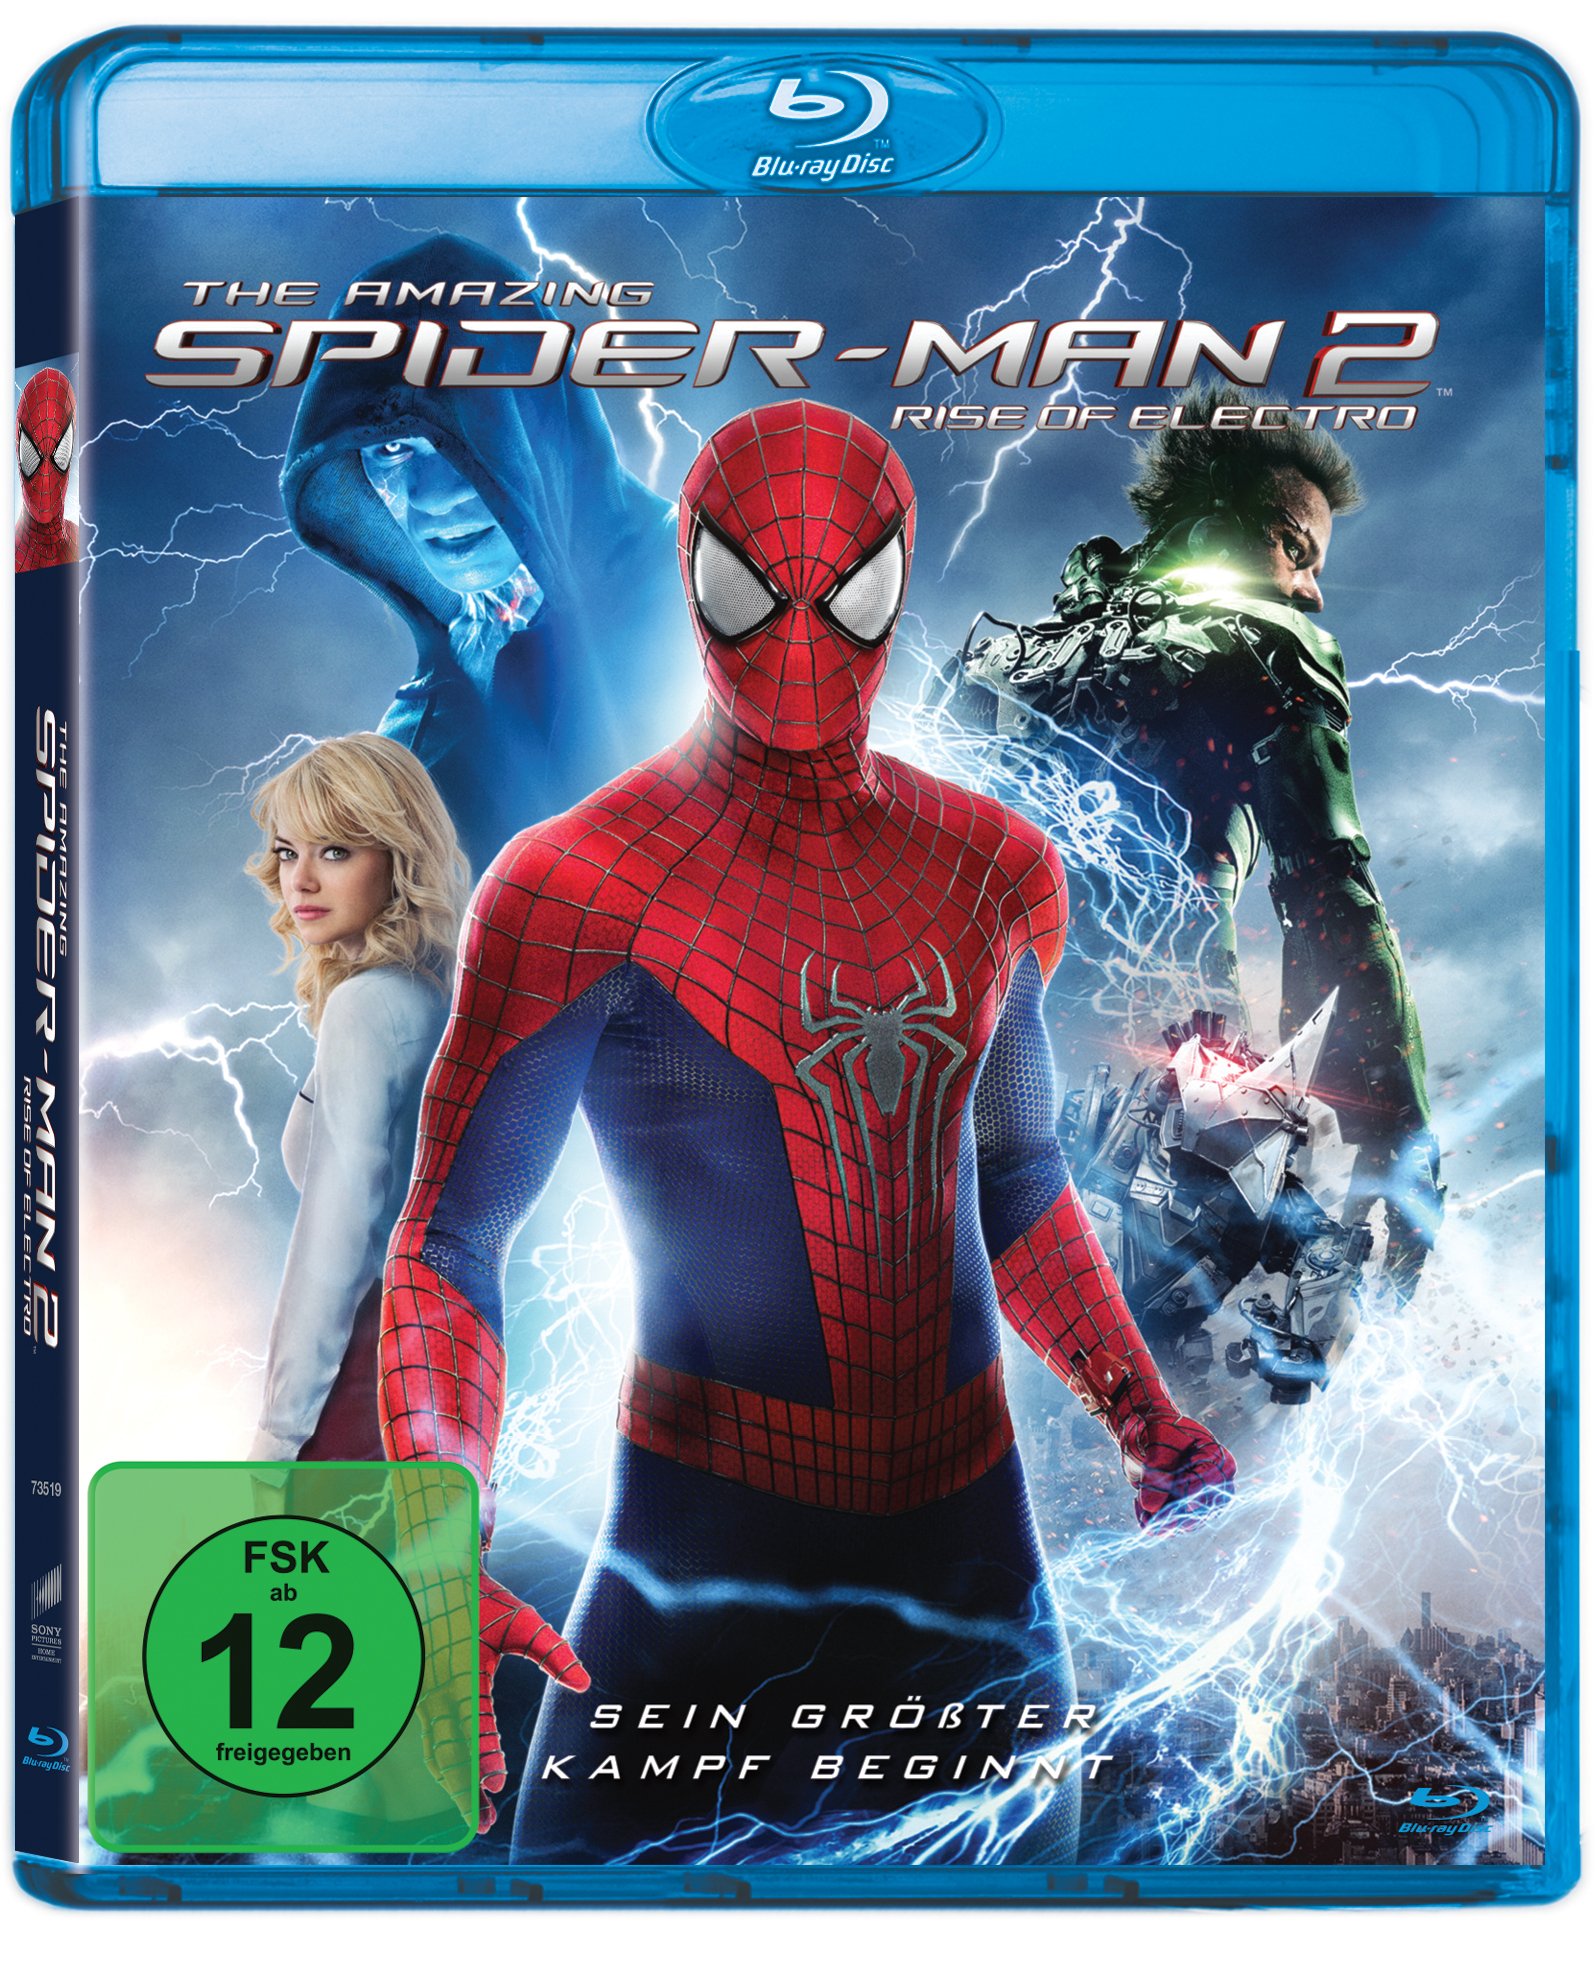 The Amazing Spider-Man 2: Rise of Electro Blu-ray